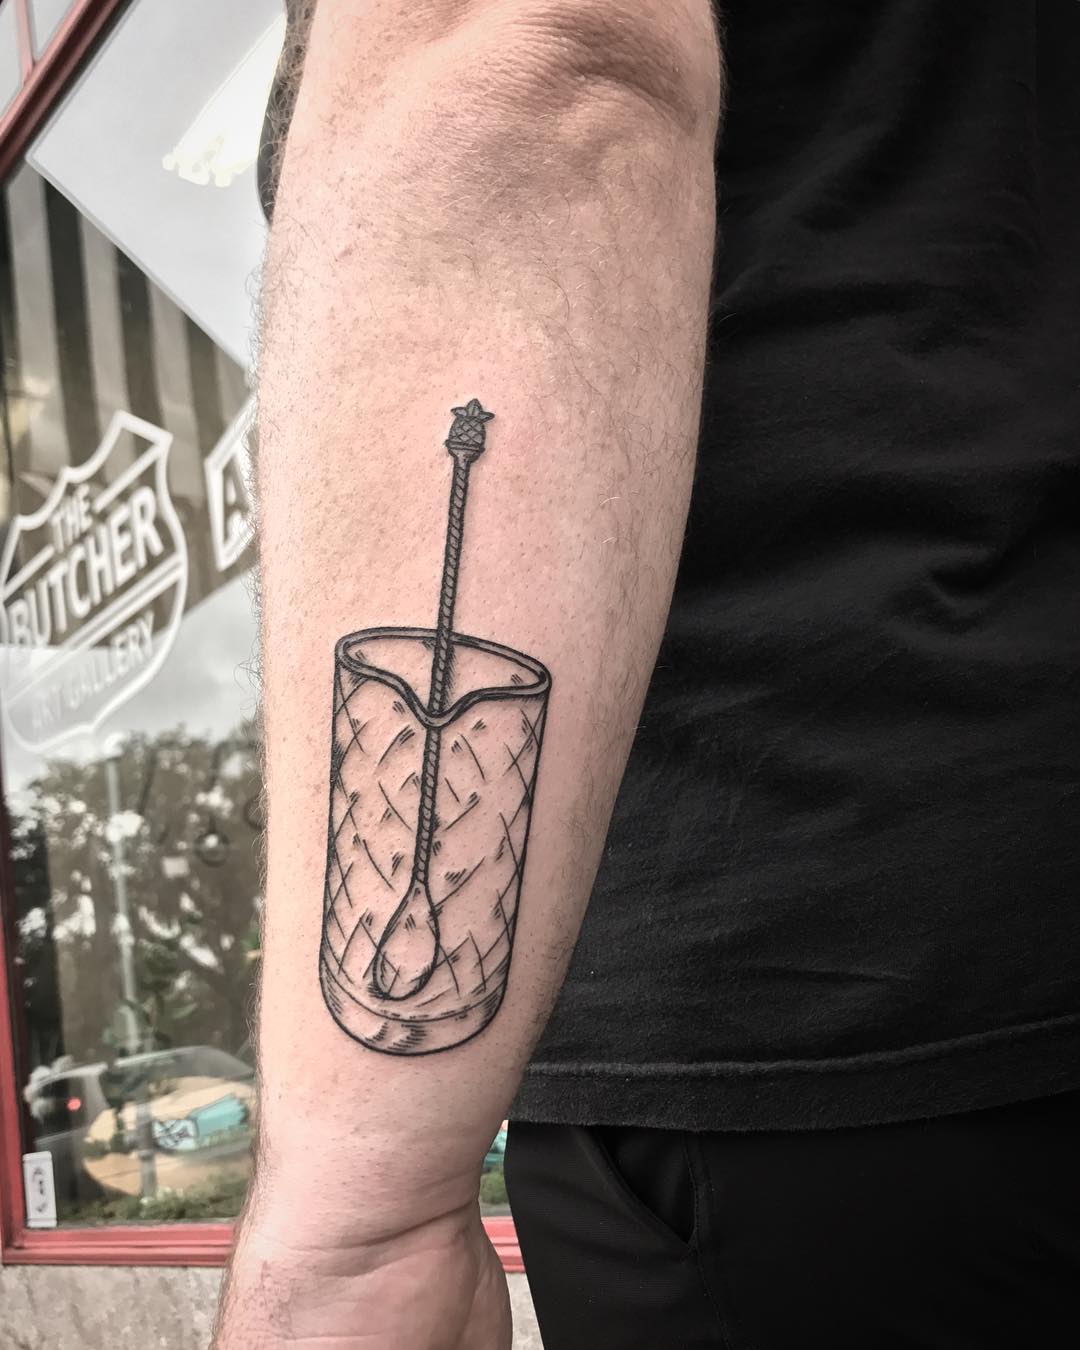 Cocktail mixer tattoo by @patcrump